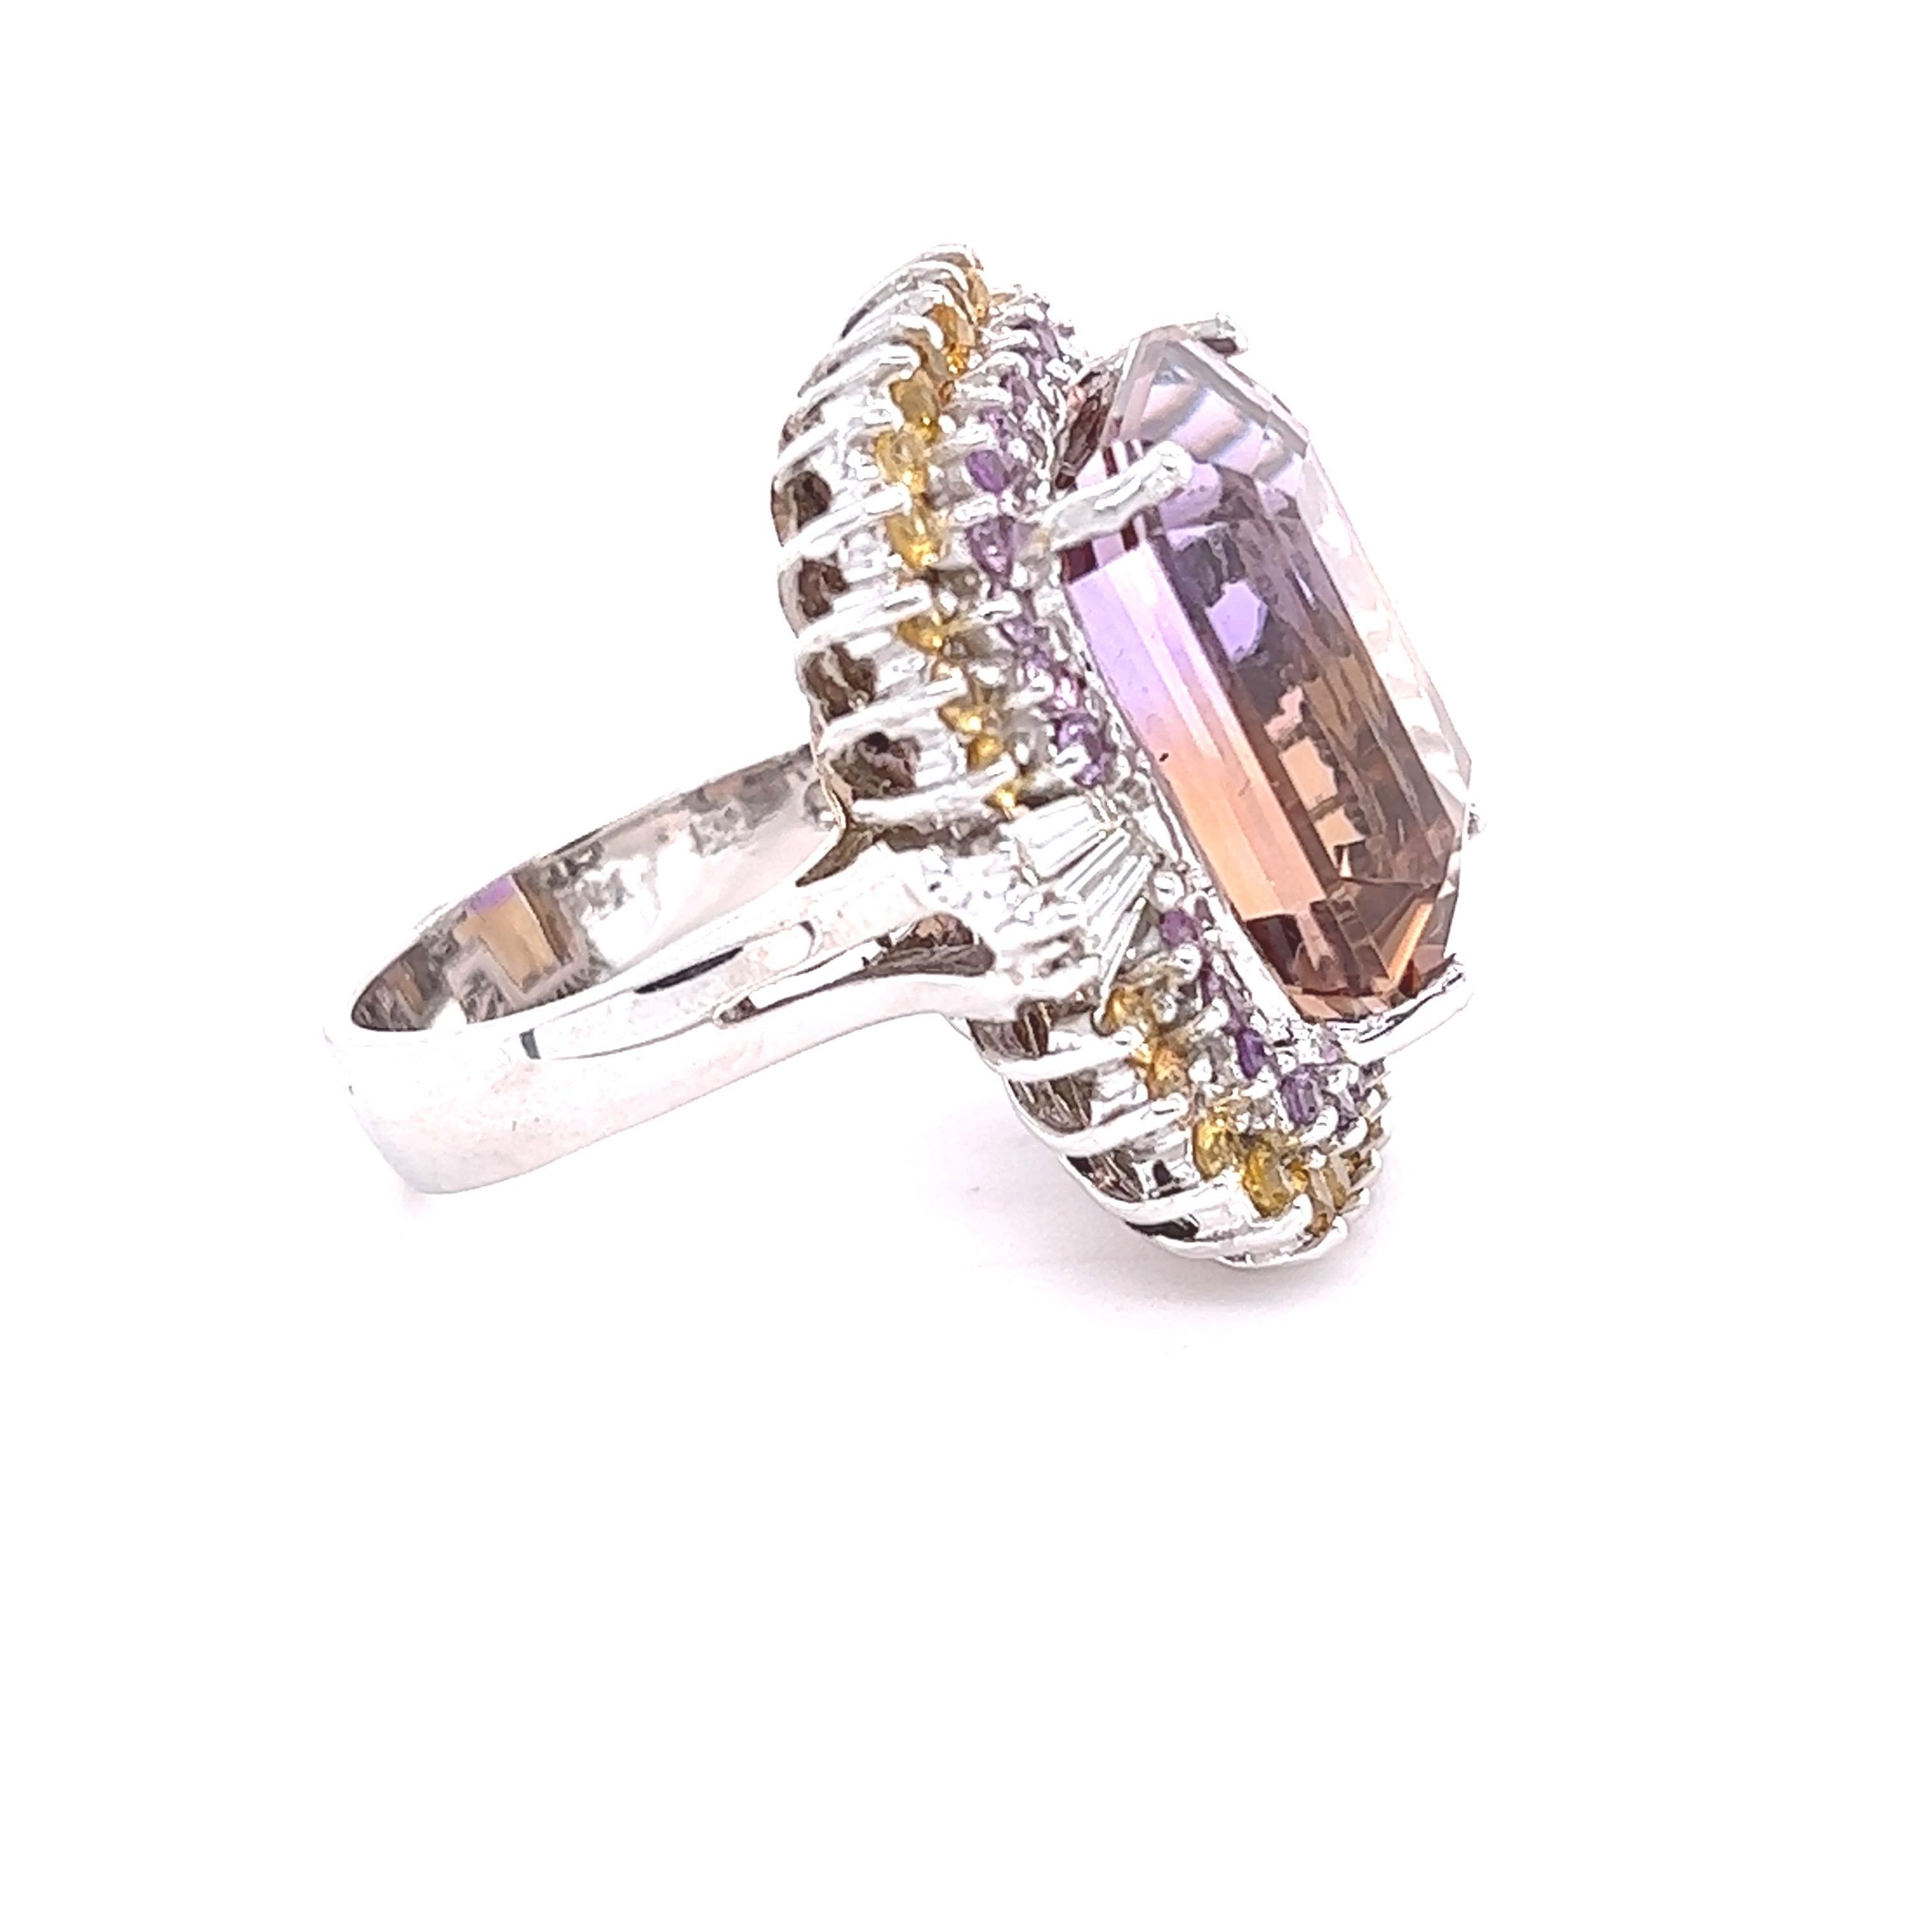 This ring has a 22.58 carat Emerald Cut Ametrine (Ametrines are a mix of amethyst and citrine yielding one natural stone) and has 6 Baguette Cut Diamonds that weigh 0.42 carats. (Clarity: SI2 Color: F)  The total weight of the ring is 24.33 carats.